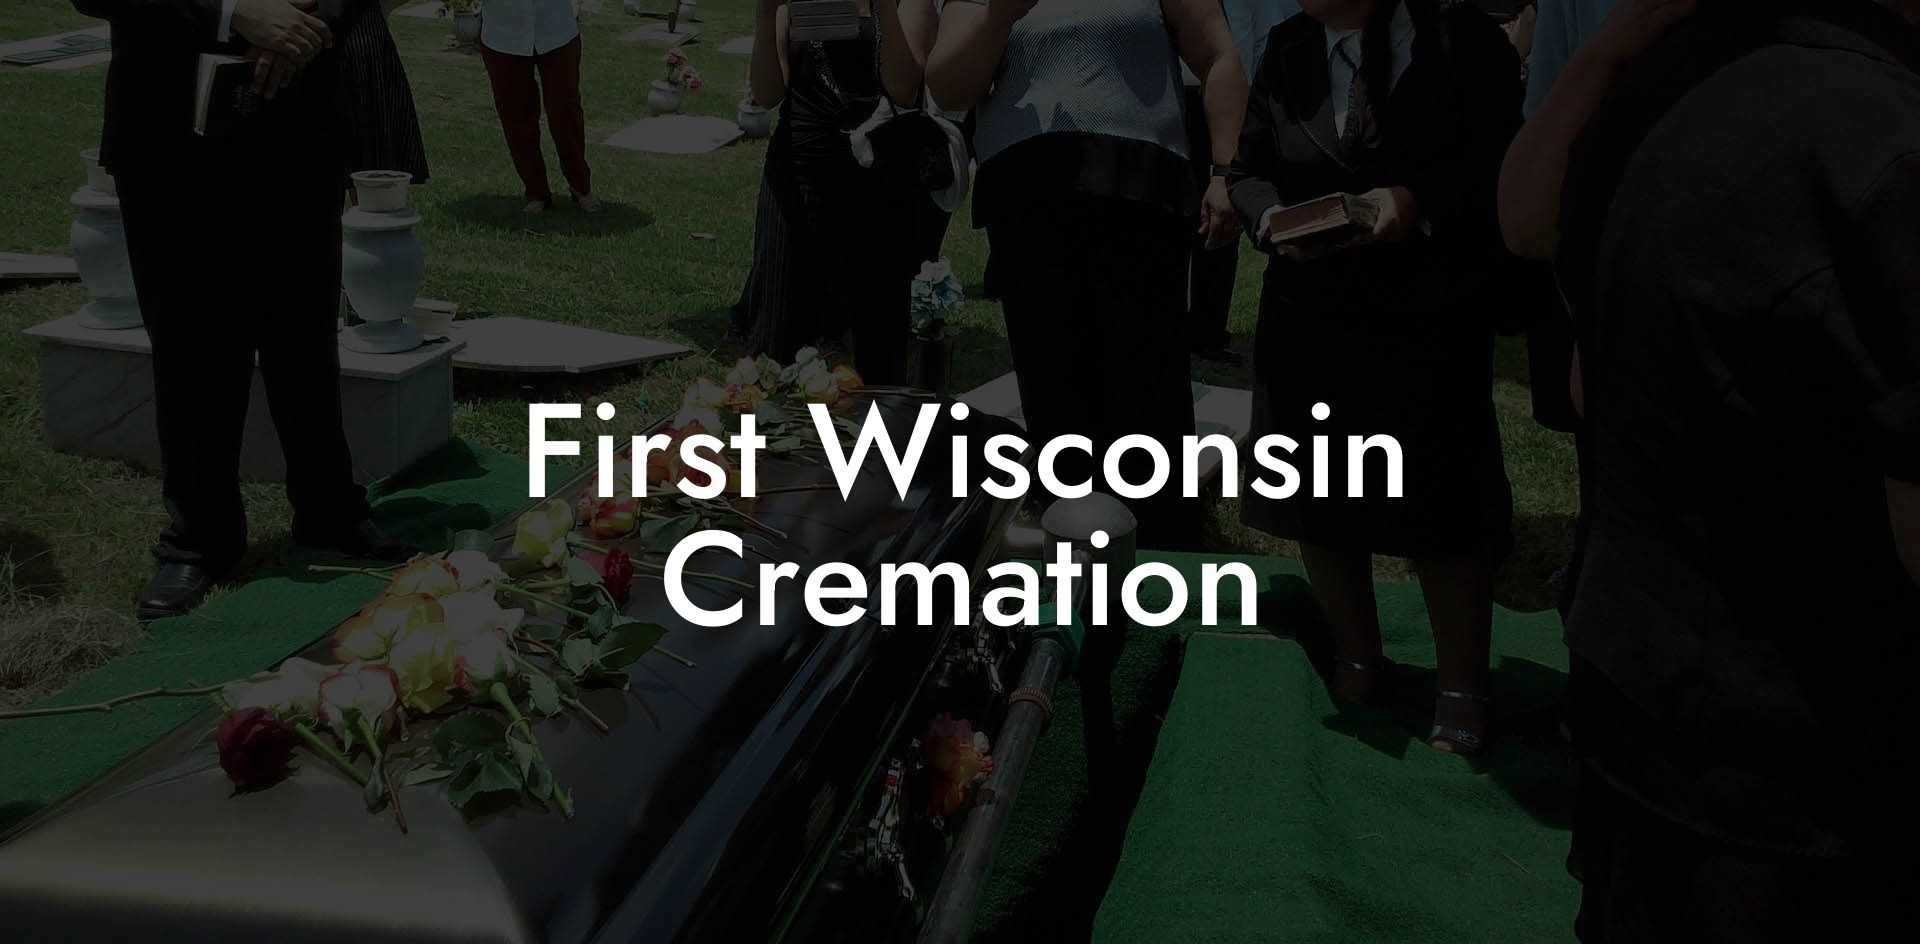 First Wisconsin Cremation